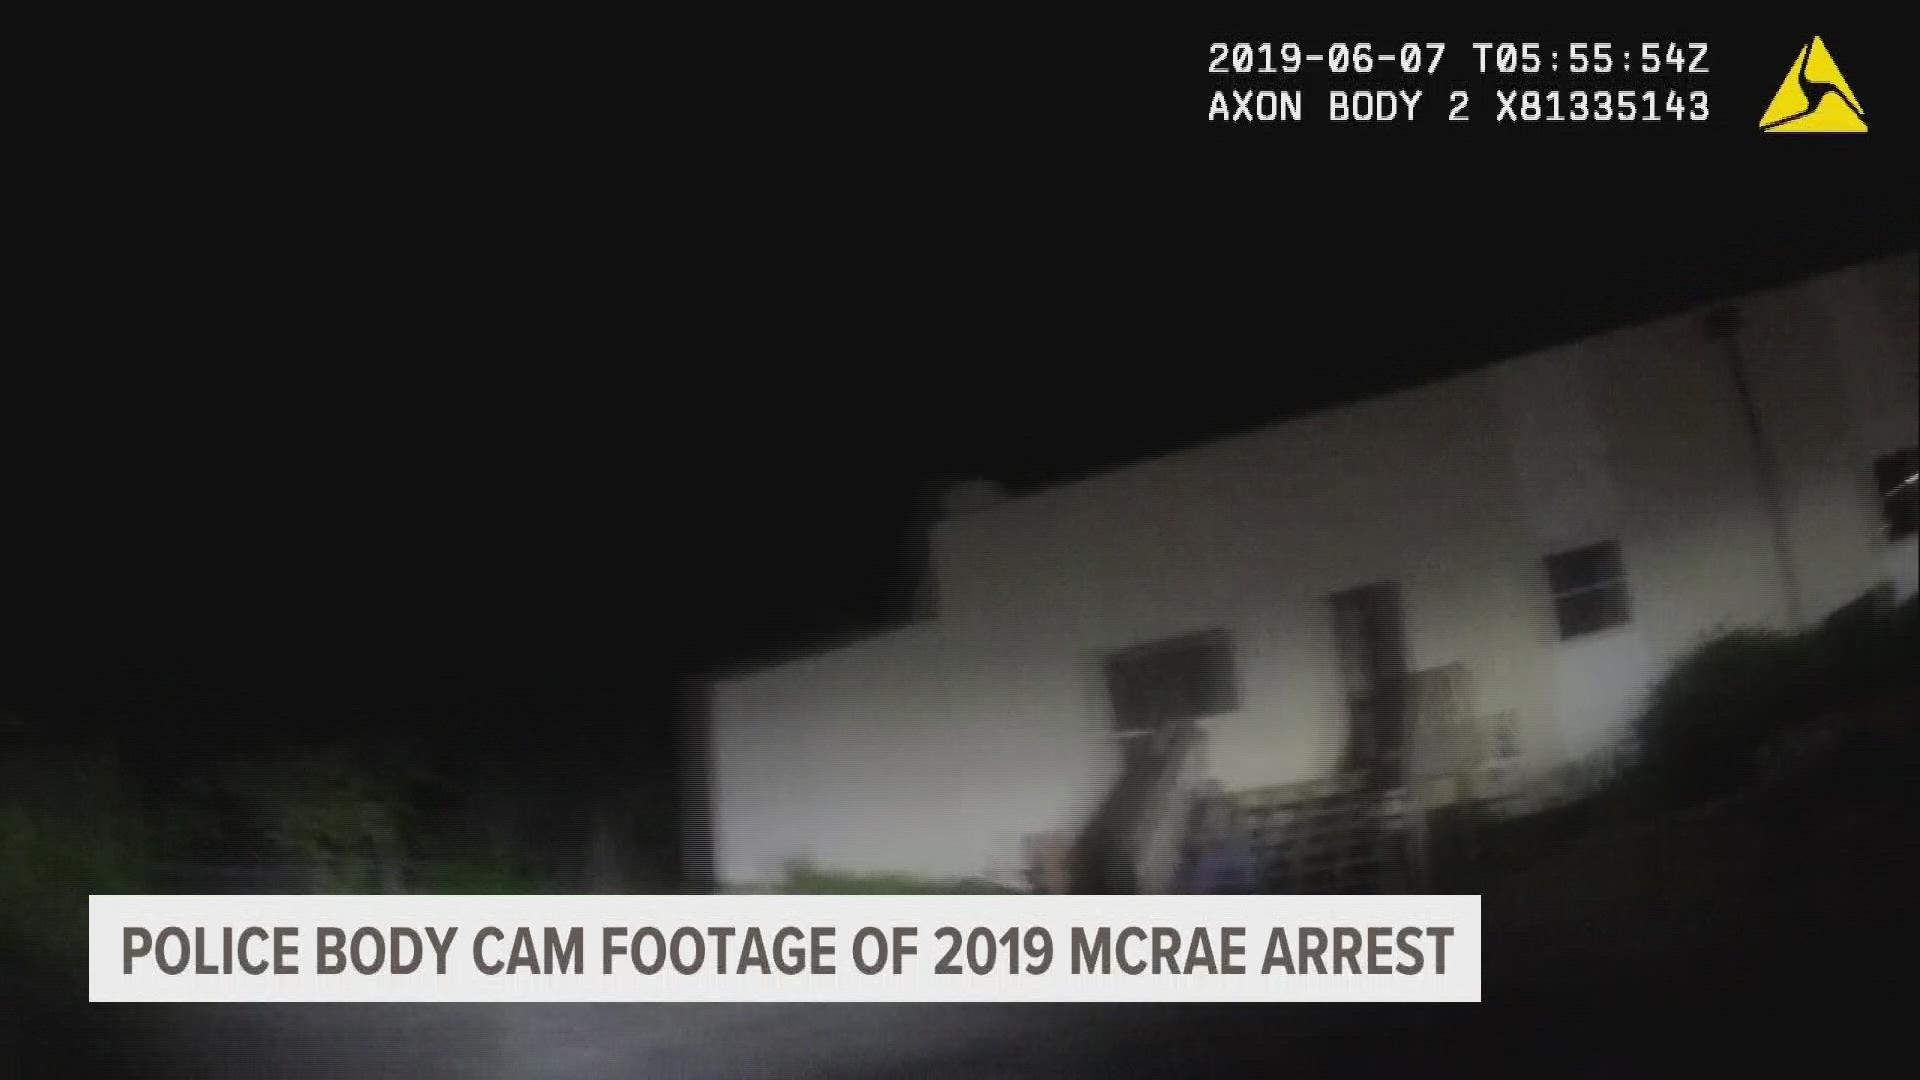 The incident took place on June 7, 2019 around 3 a.m. when McRae was stopped by police in Lansing.